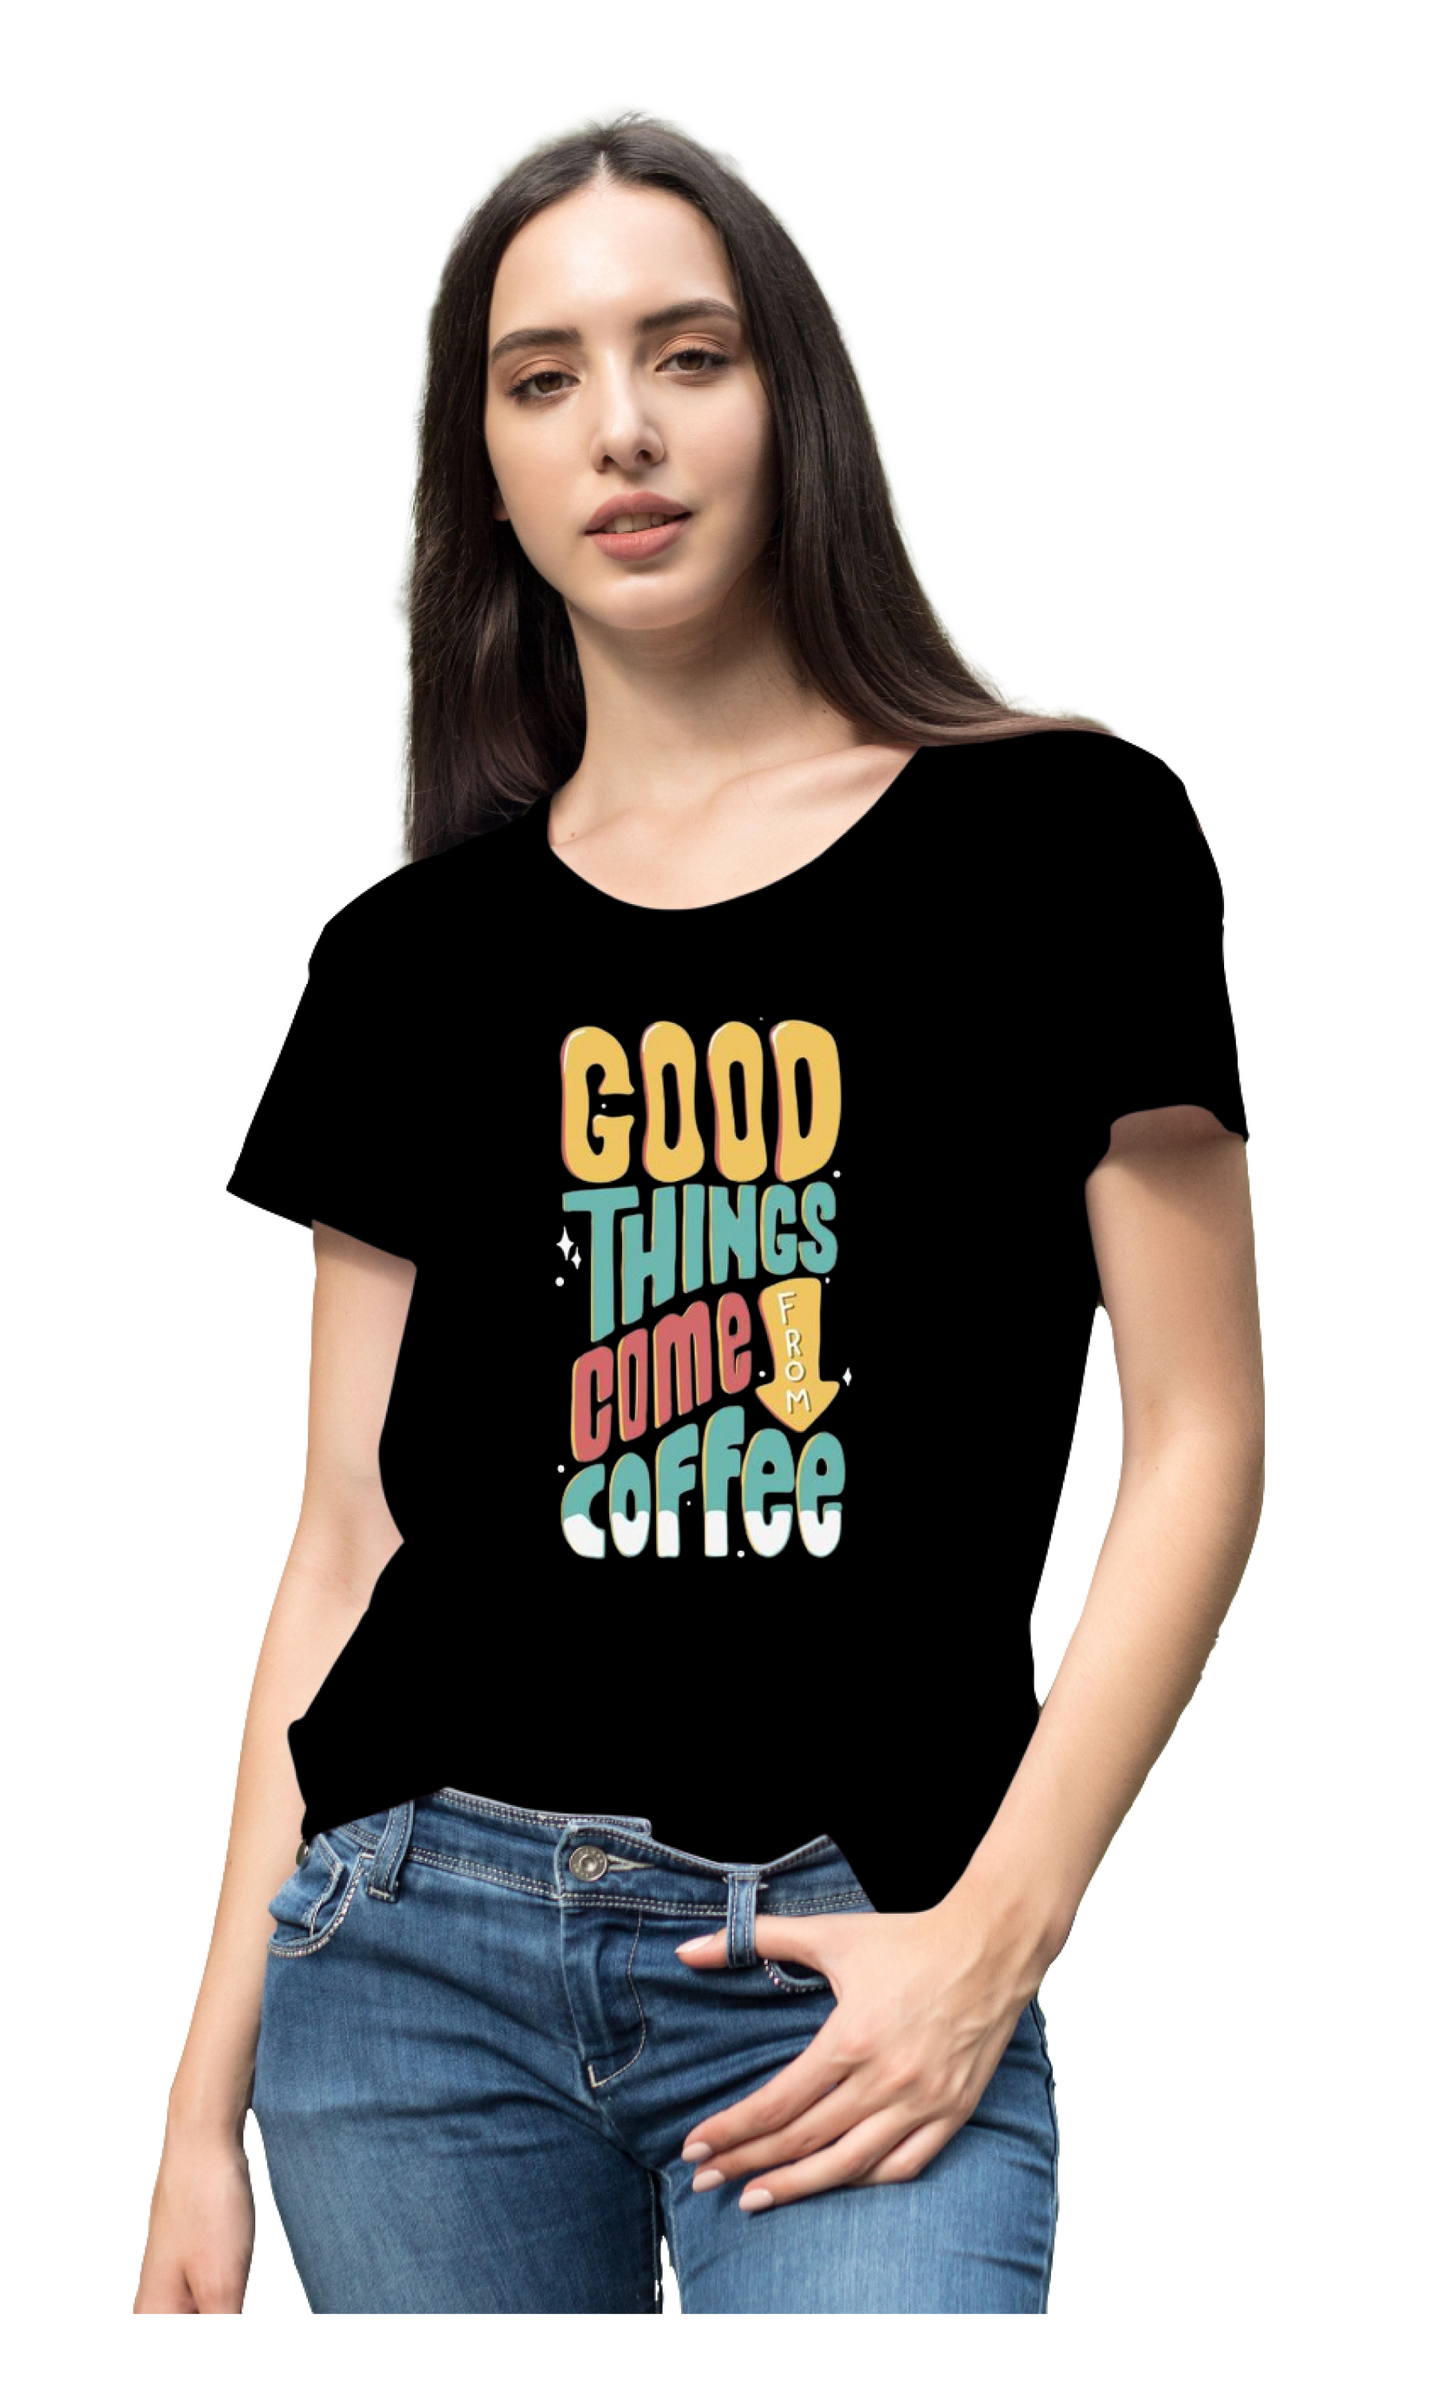 Good things come from coffee Half Sleeve T-shirt for Women